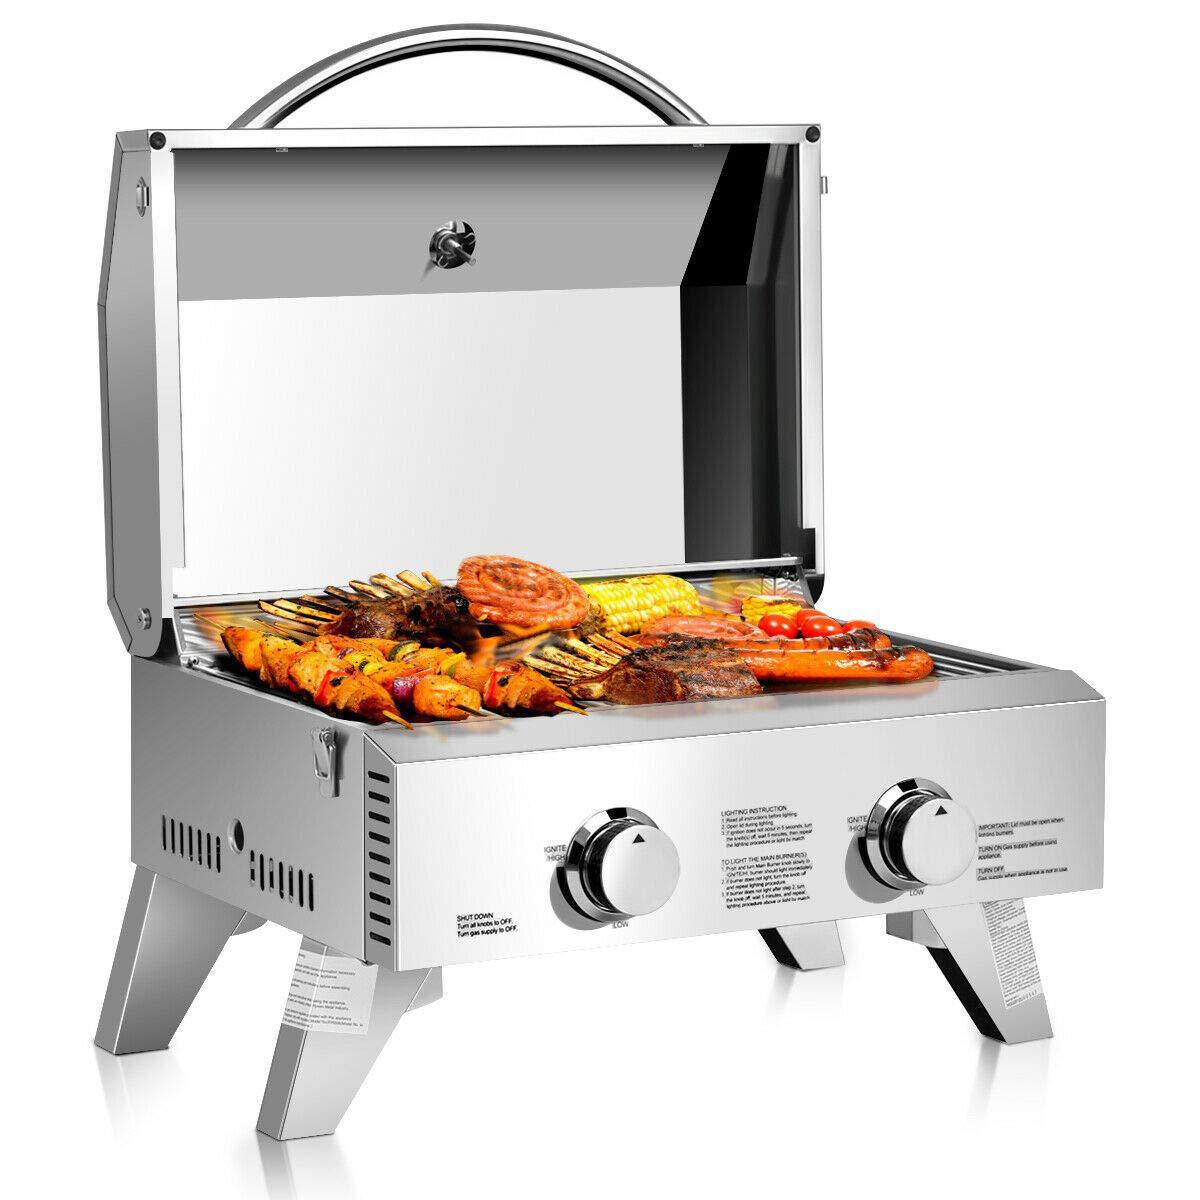 dortala freestanding barbecue grills, steel propane gas grill w/ temperature control stove and two burners, portable bbq gril